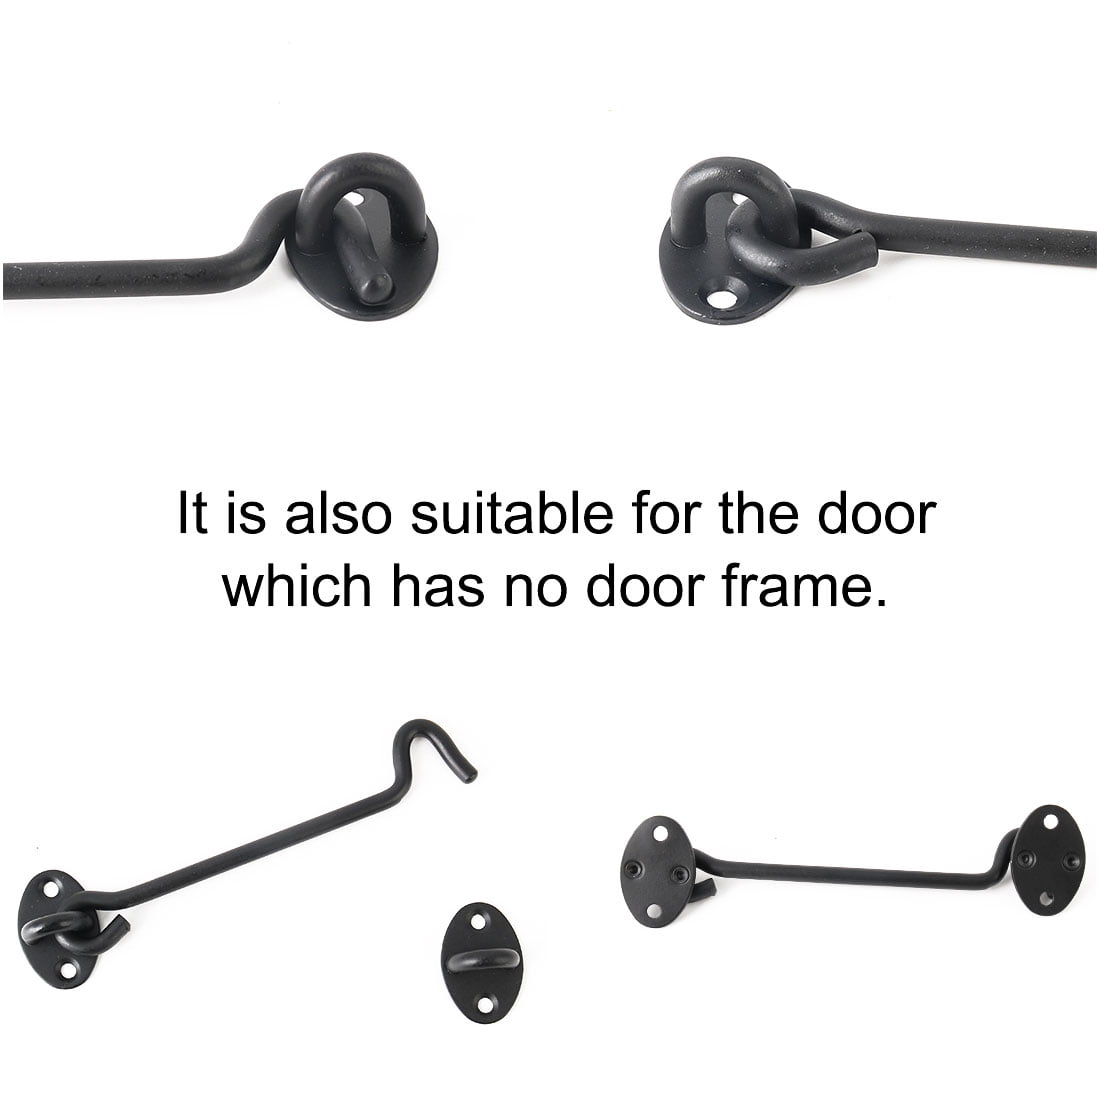 POMAKER Cabin Hook Eye Latch for Doors, 3pack Privacy Hook with